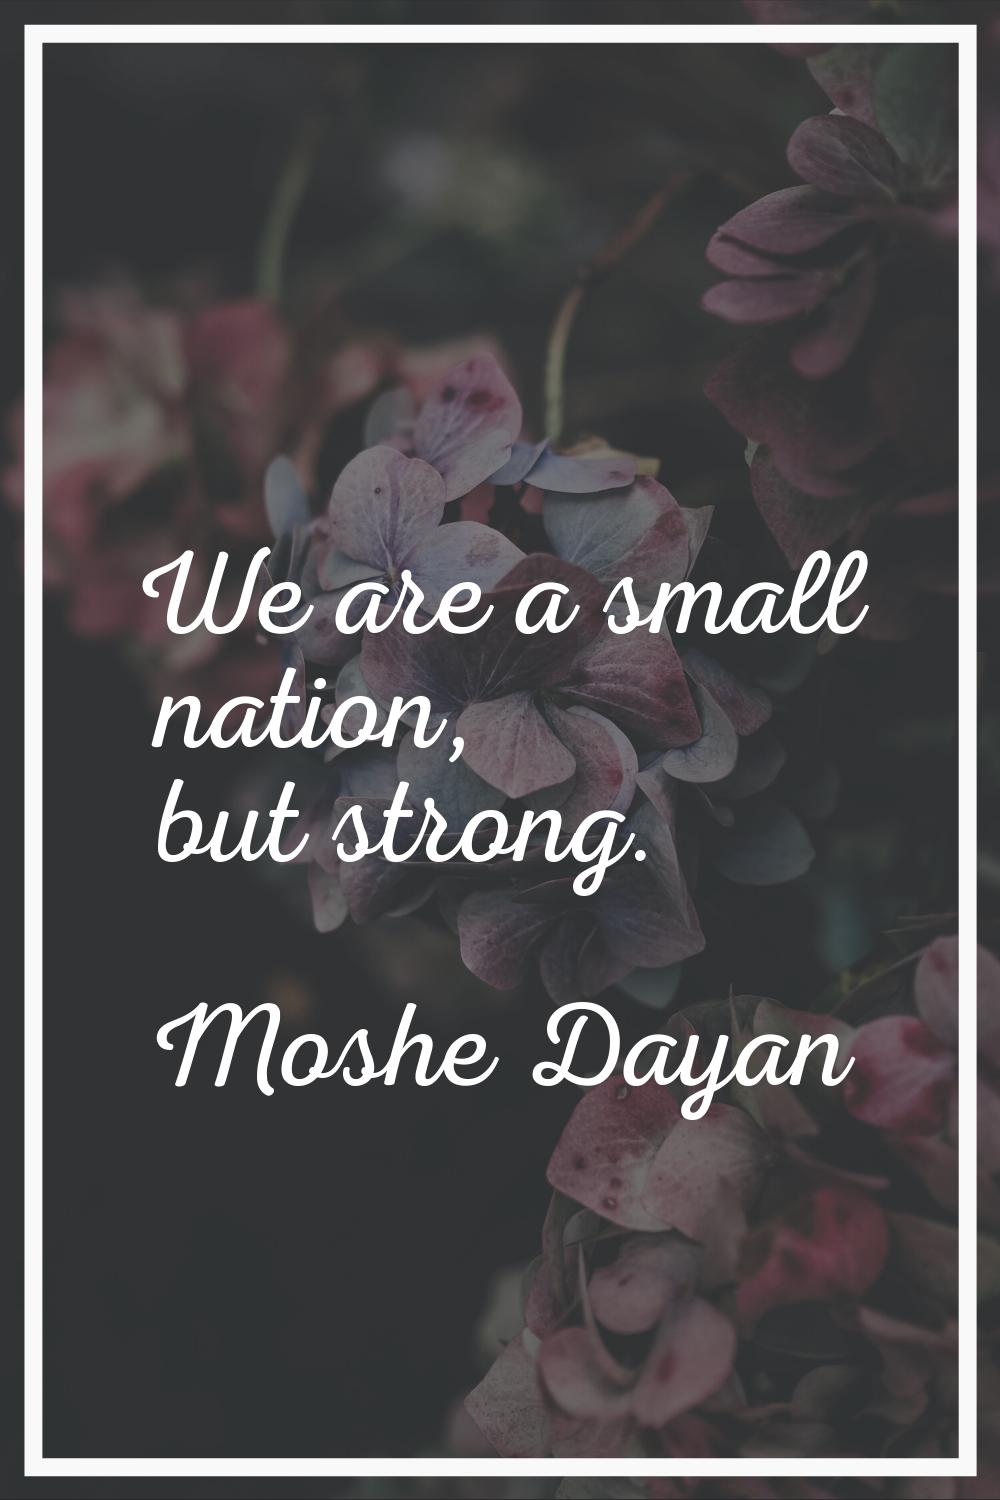 We are a small nation, but strong.